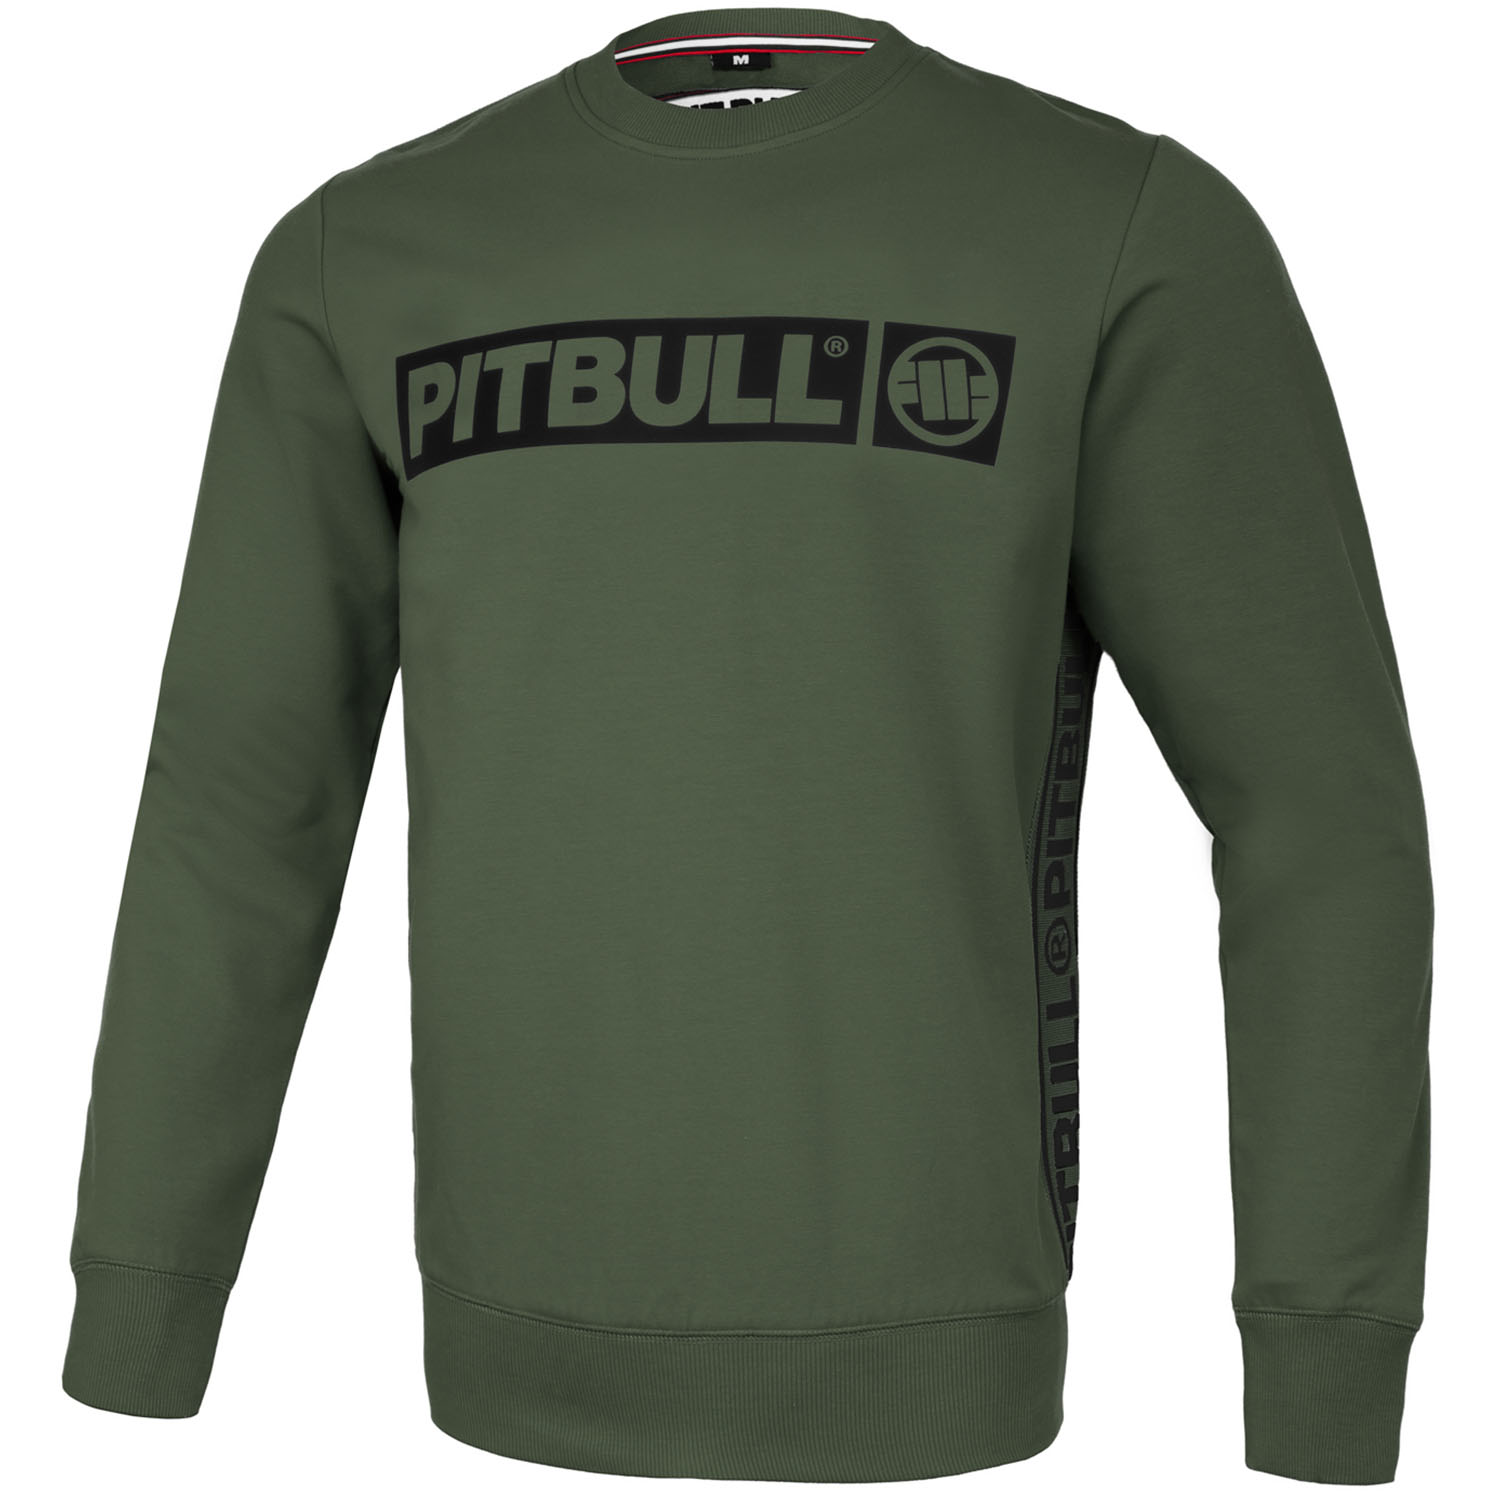 Pit Bull West Coast Pullover, Albion, olive